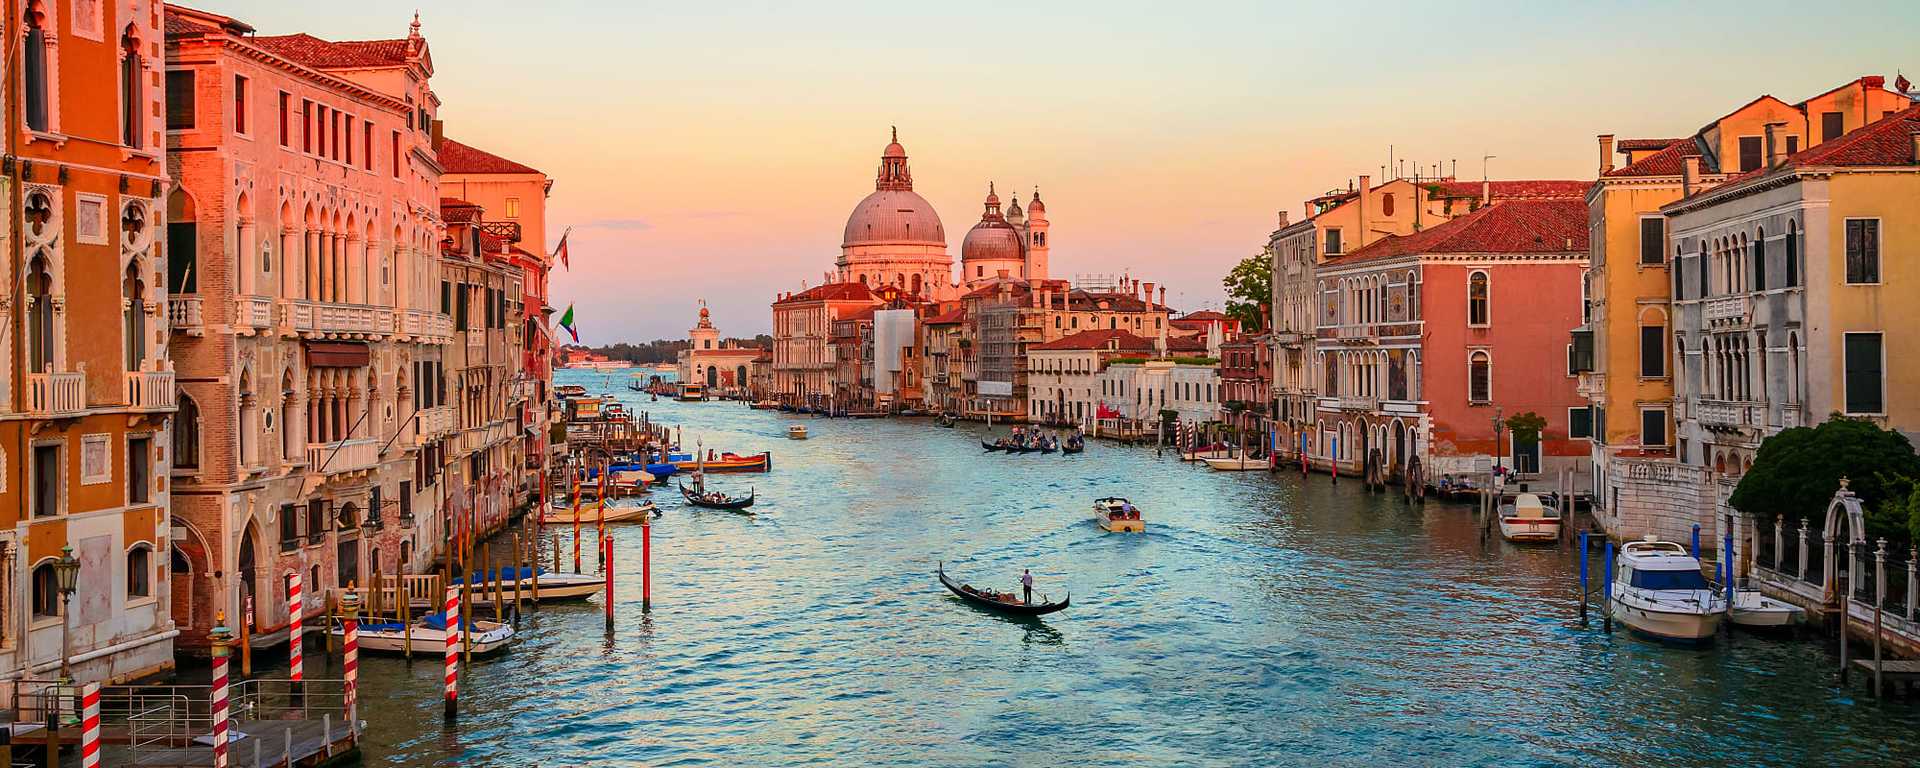 Italy Tours & Trip Packages 20232024 Zicasso